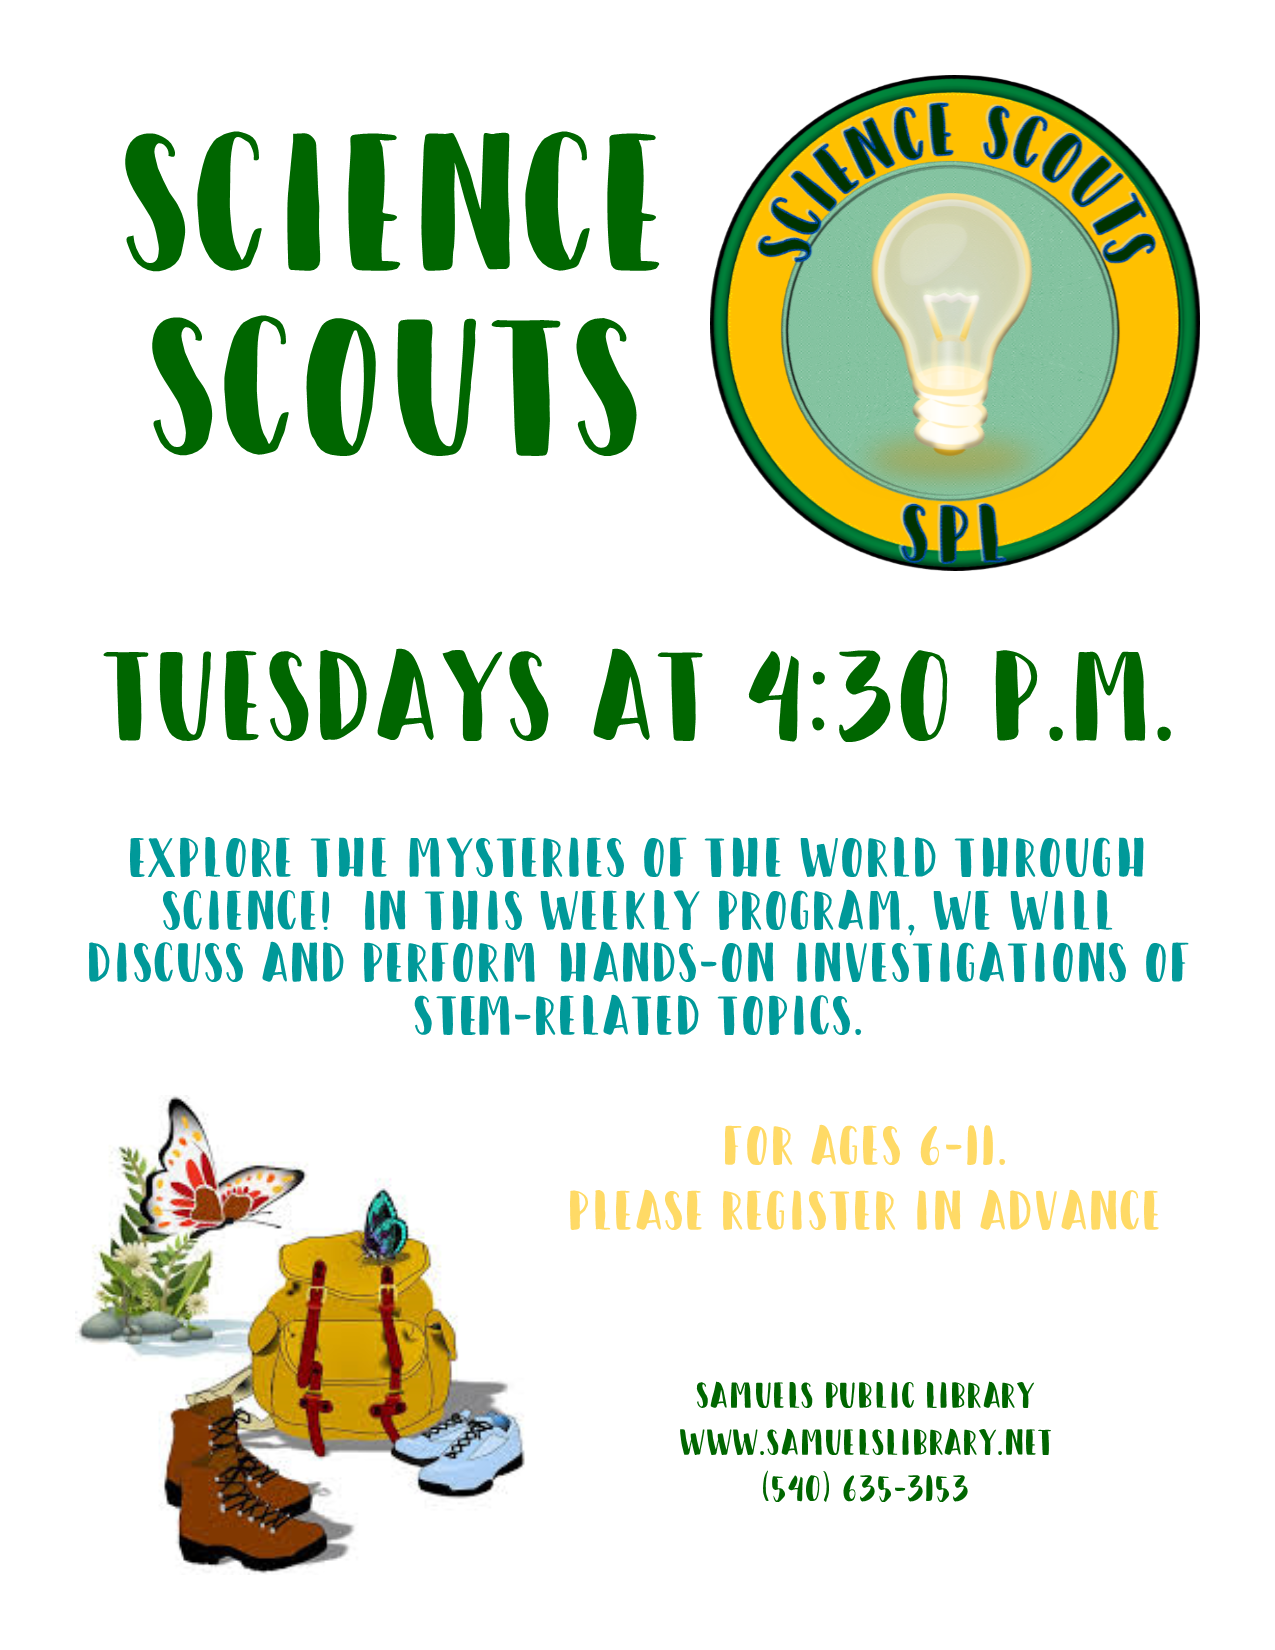 Science Scouts meets after school on Tuesdays.